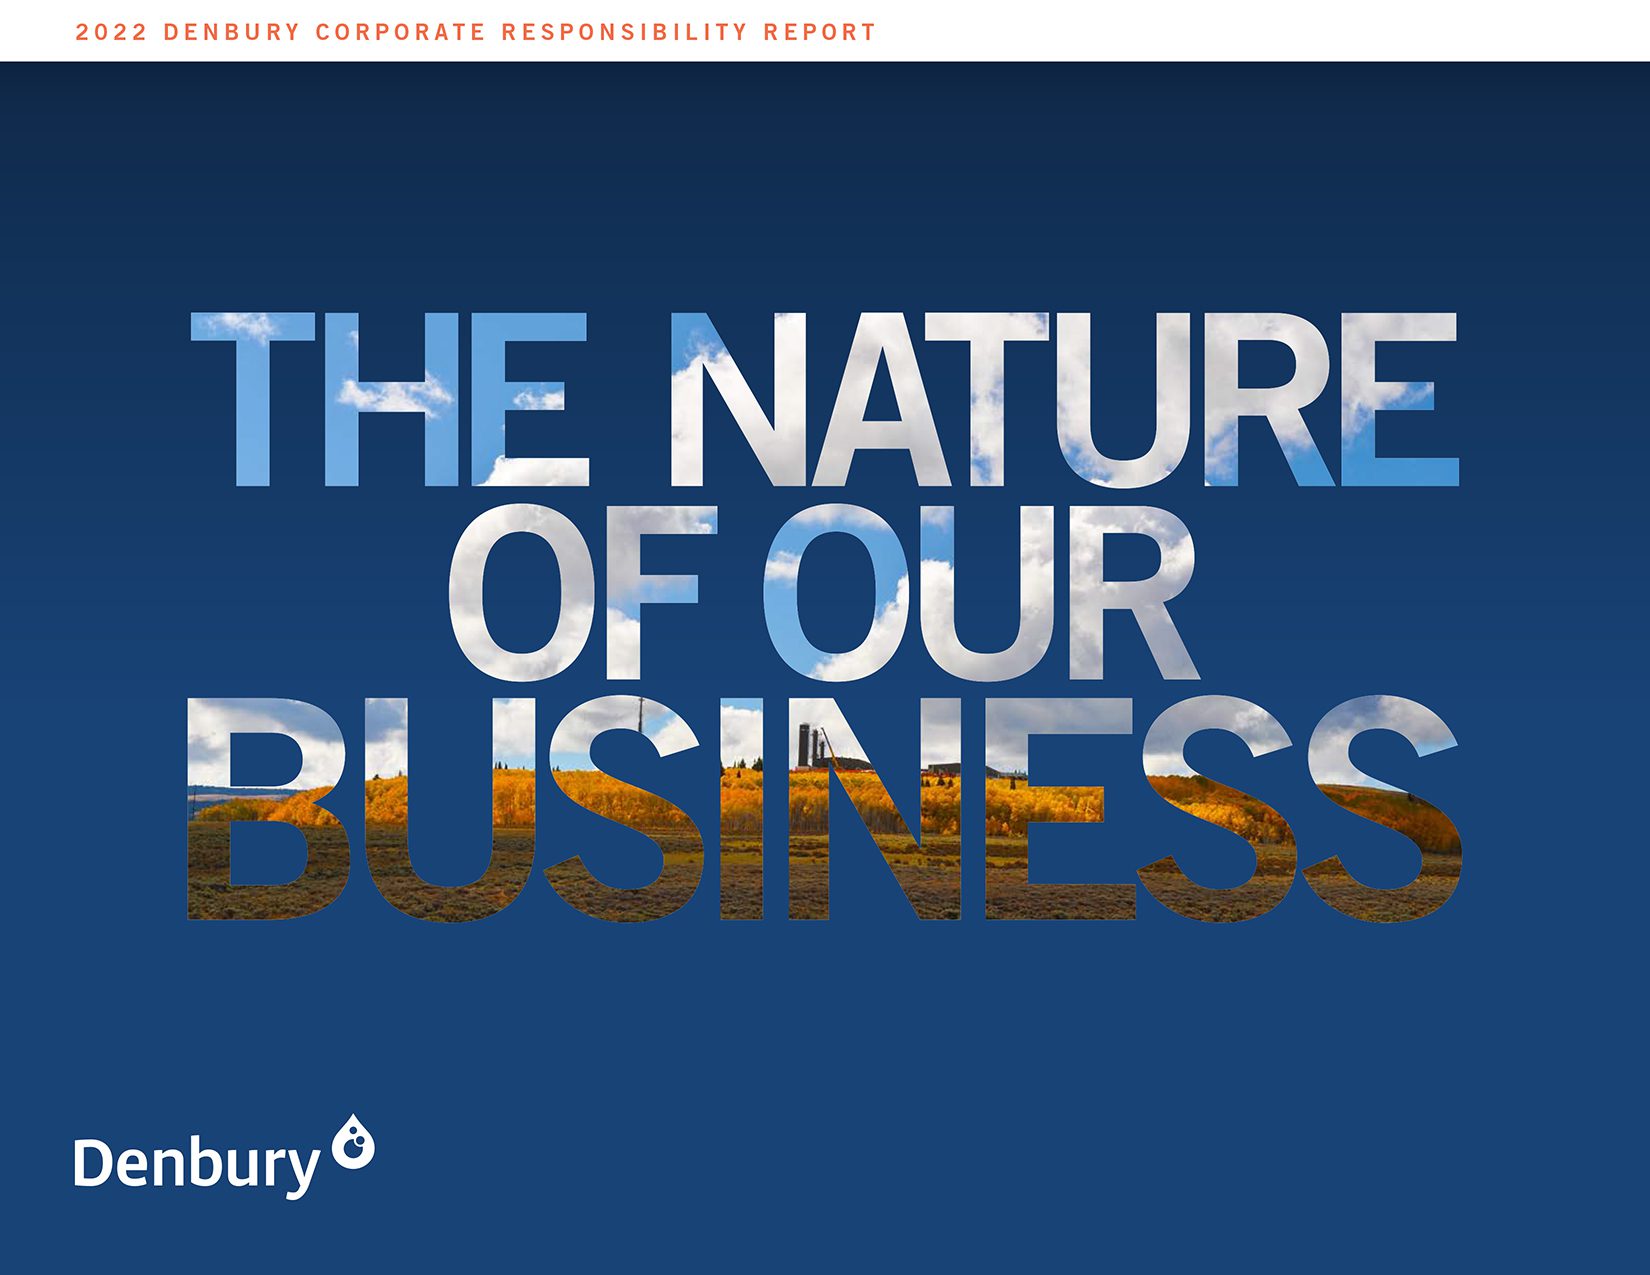 For more about how Denbury values our people, refer to the 2022 Corporate Responsibility Report. 